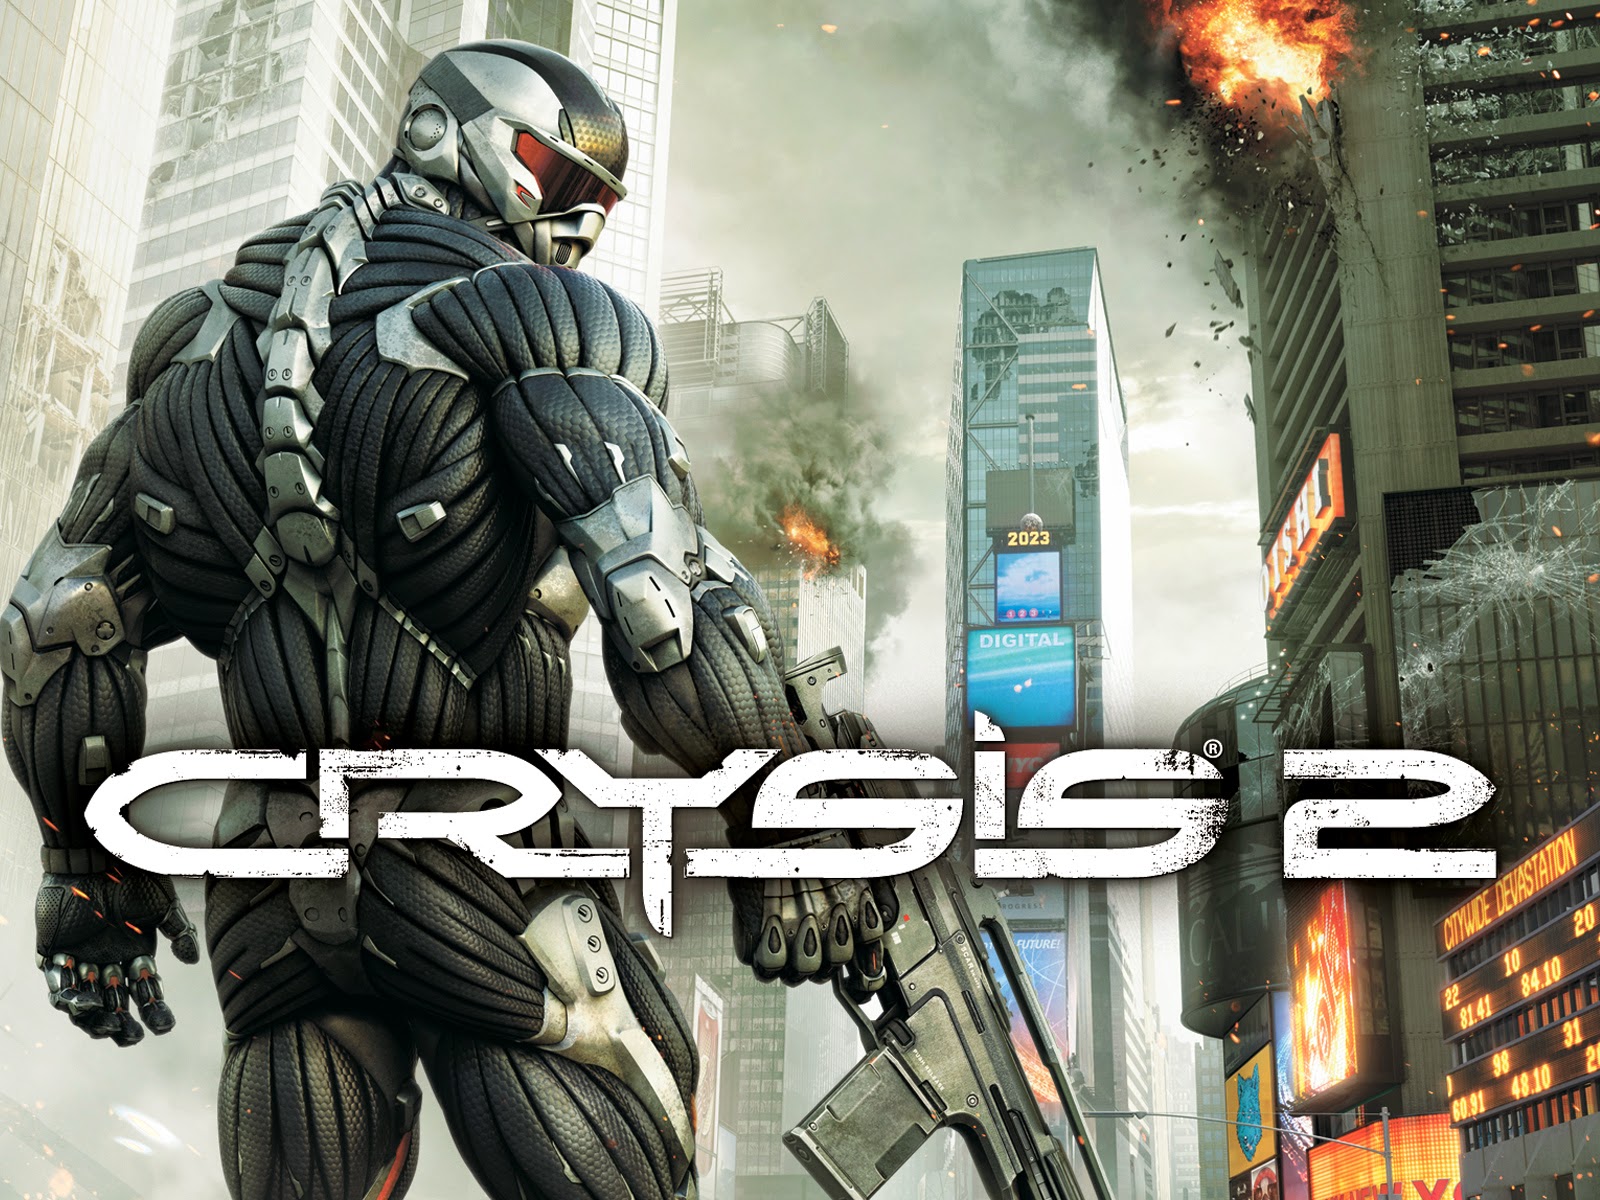 crysis 2 crack failed to initialize the gamestartup interface